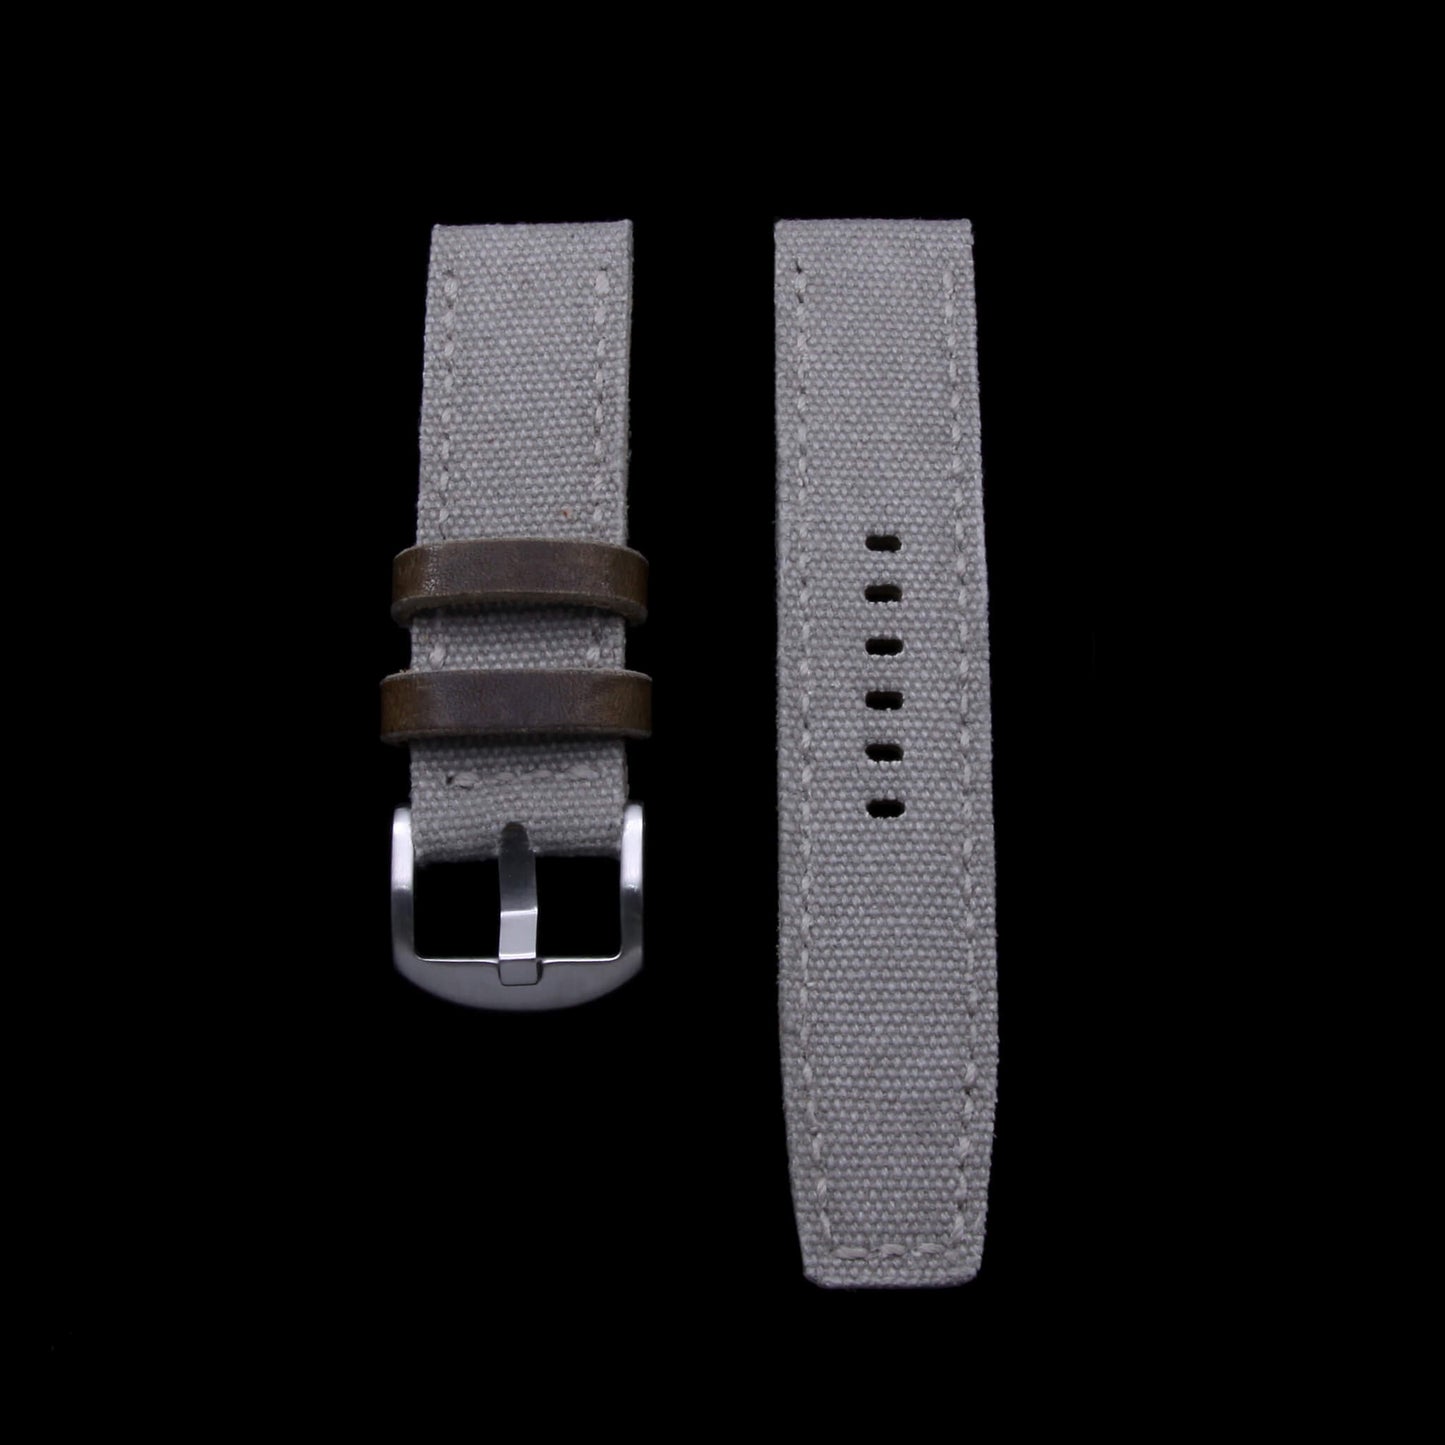 2nd View of 2-Piece Full Stitch Leather Watch Strap, made with Grey Canvas and Italian veg-tanned leather lining, handcrafted by Cozy Handmade